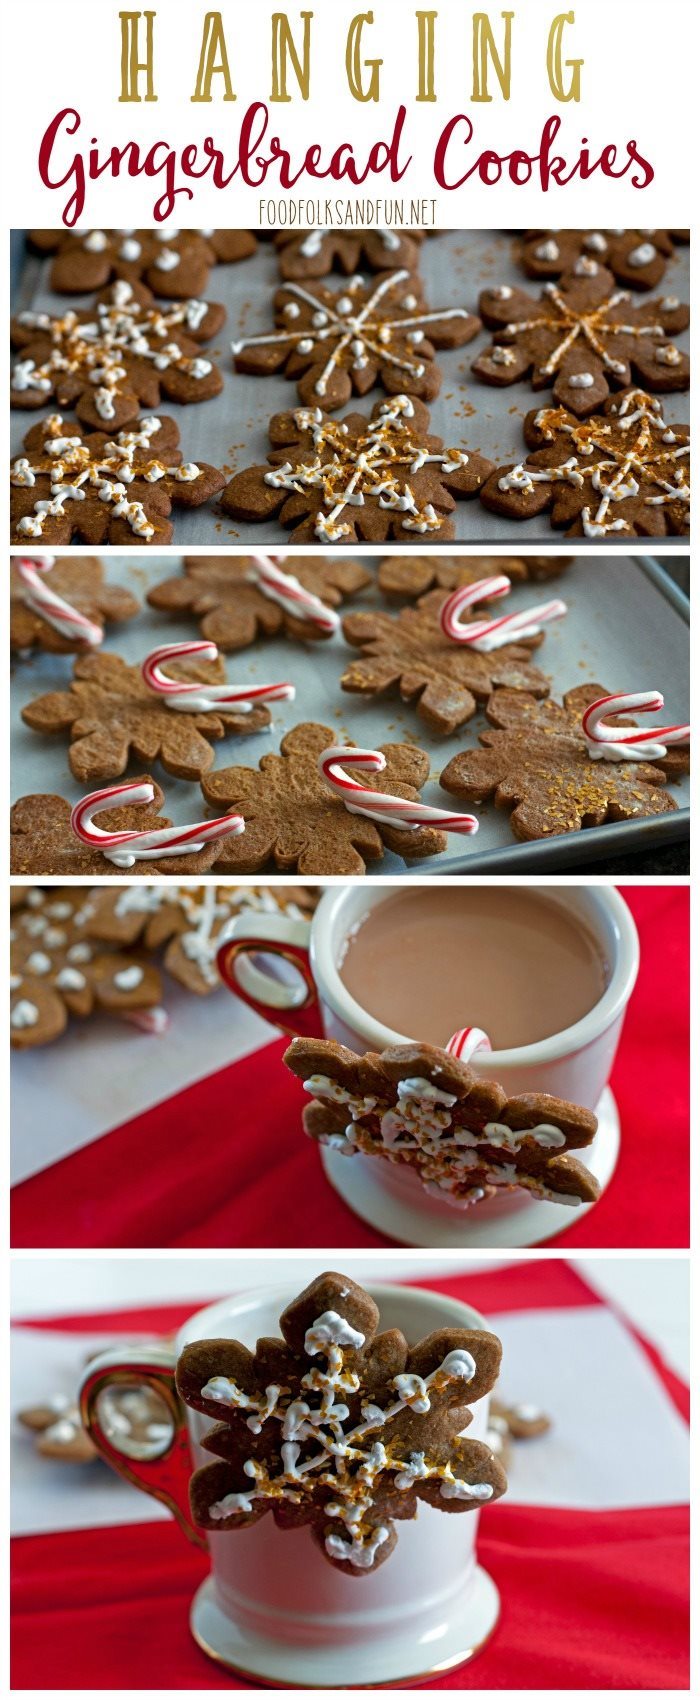 Picture collage of hanging gingerbread cookies gift for Pinterest.